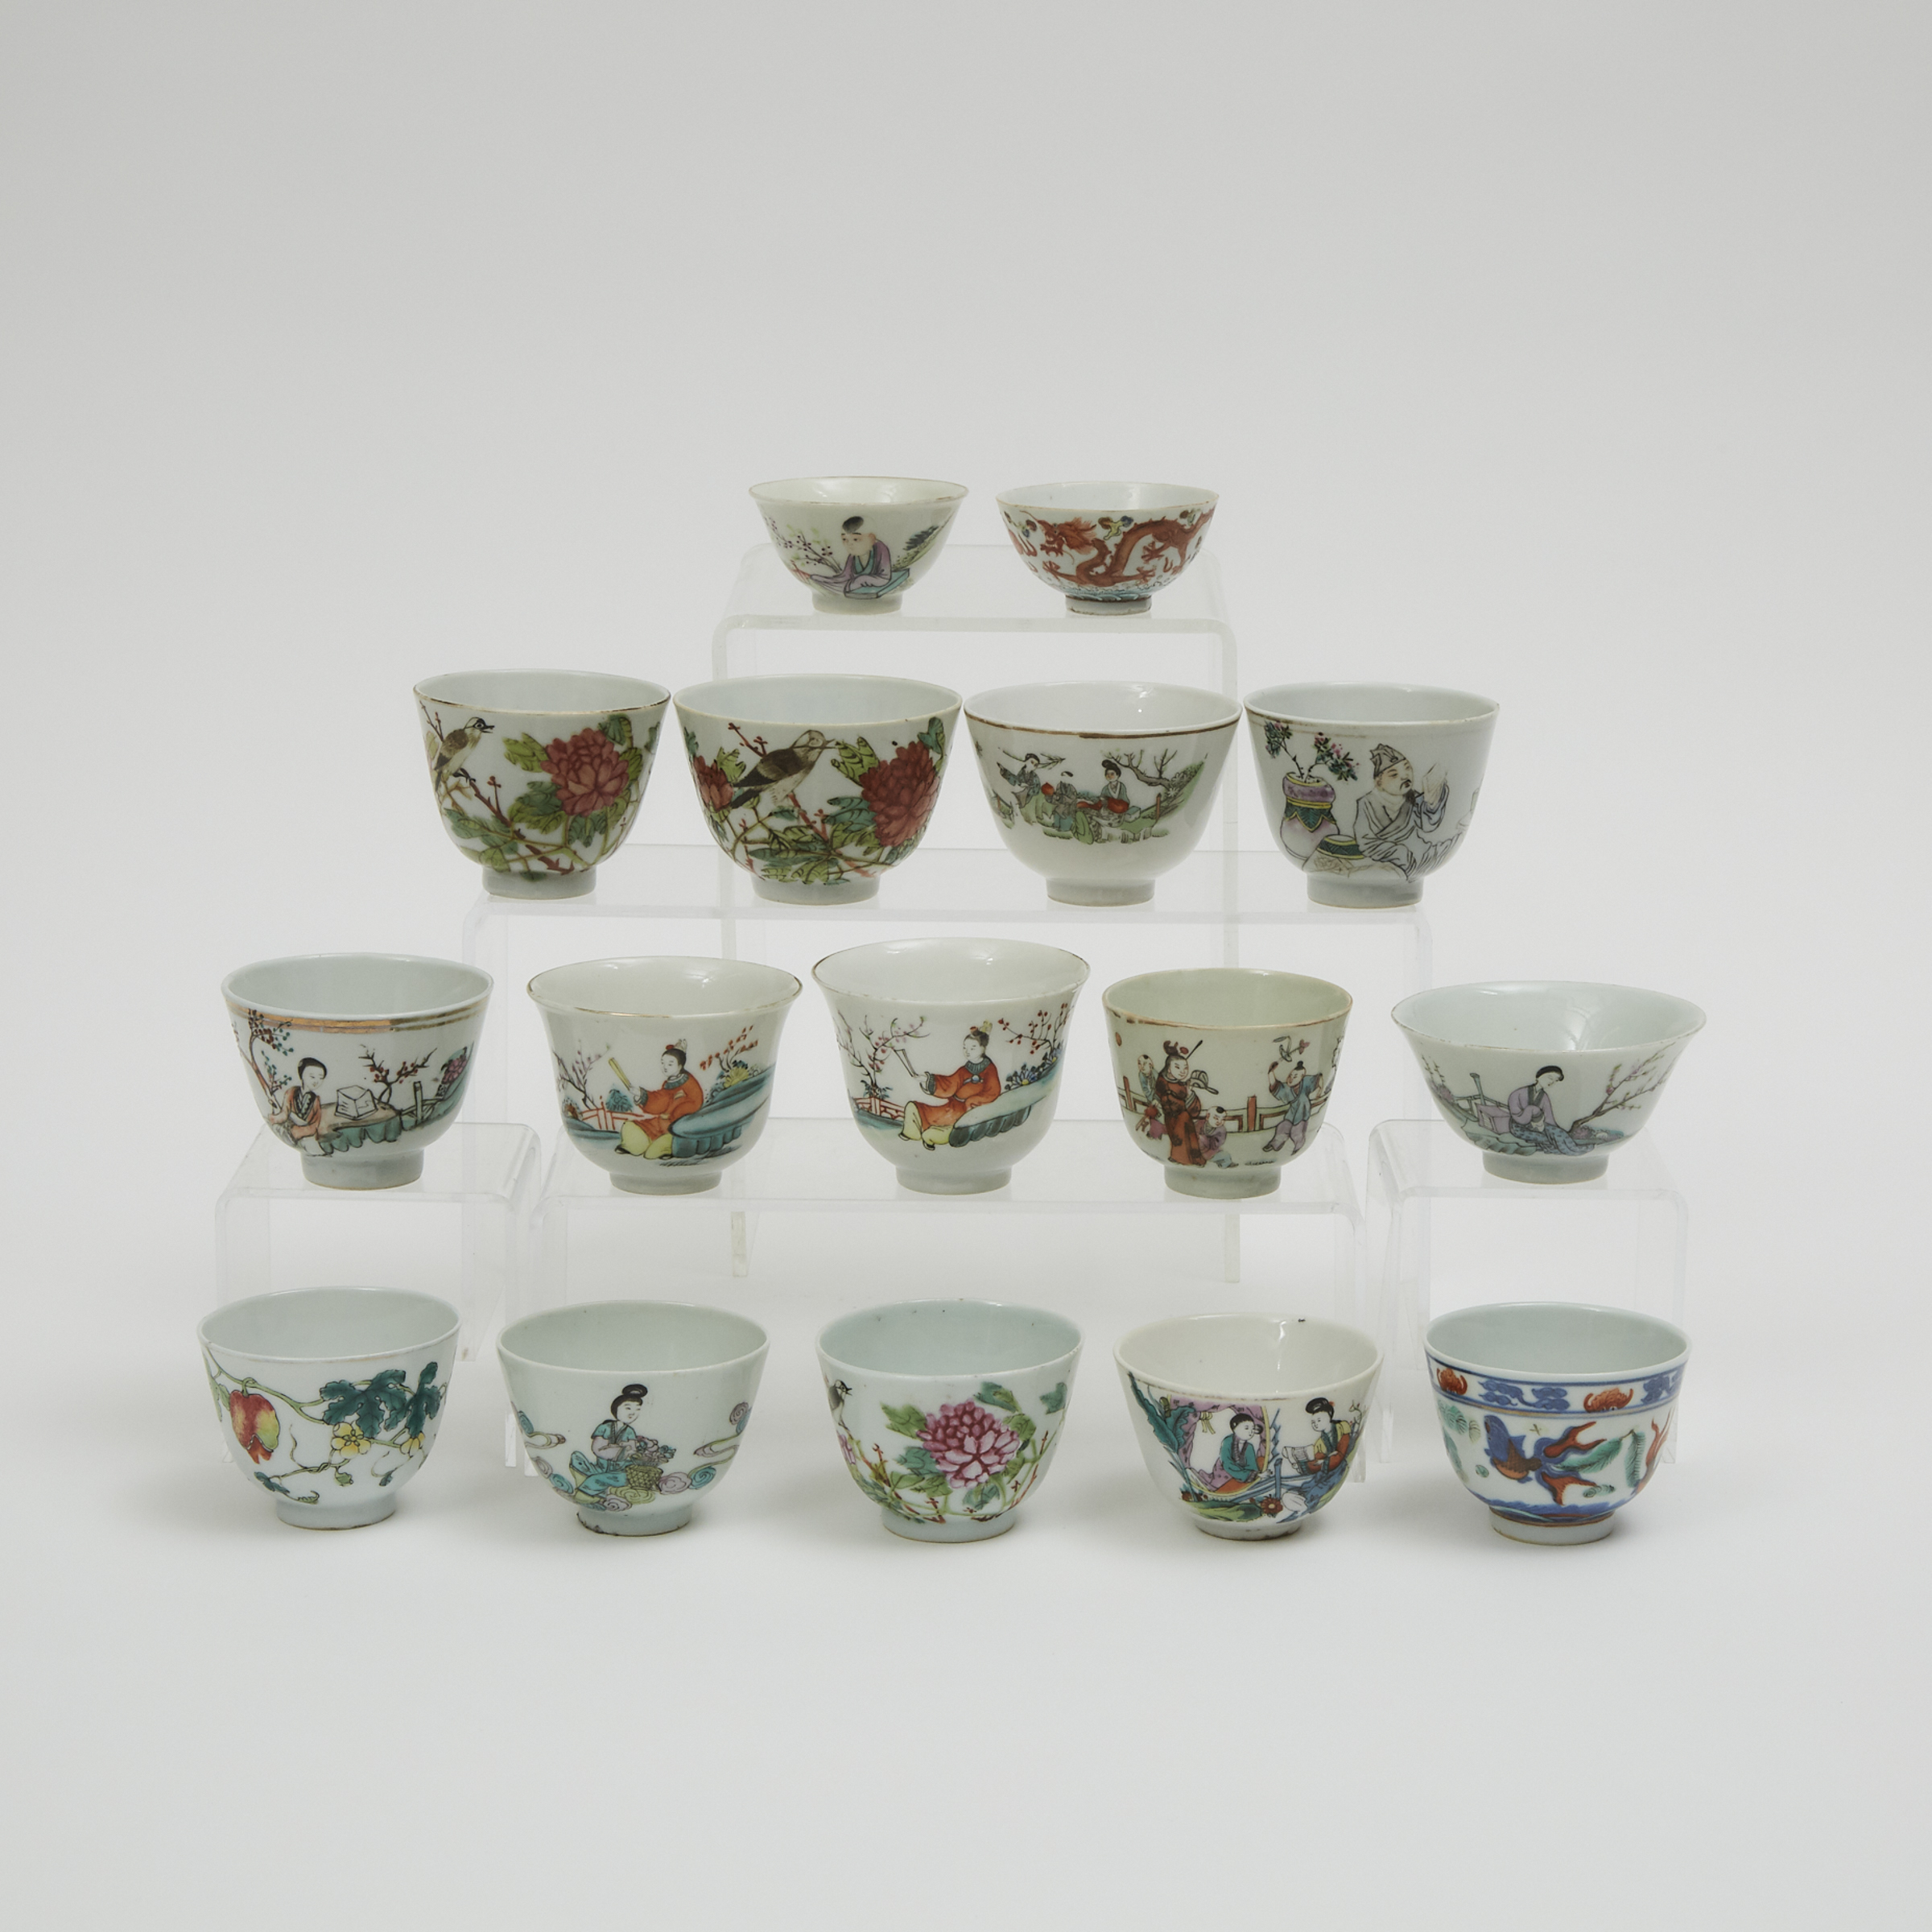 A Group of Sixteen Porcelain Cups, Republican Period